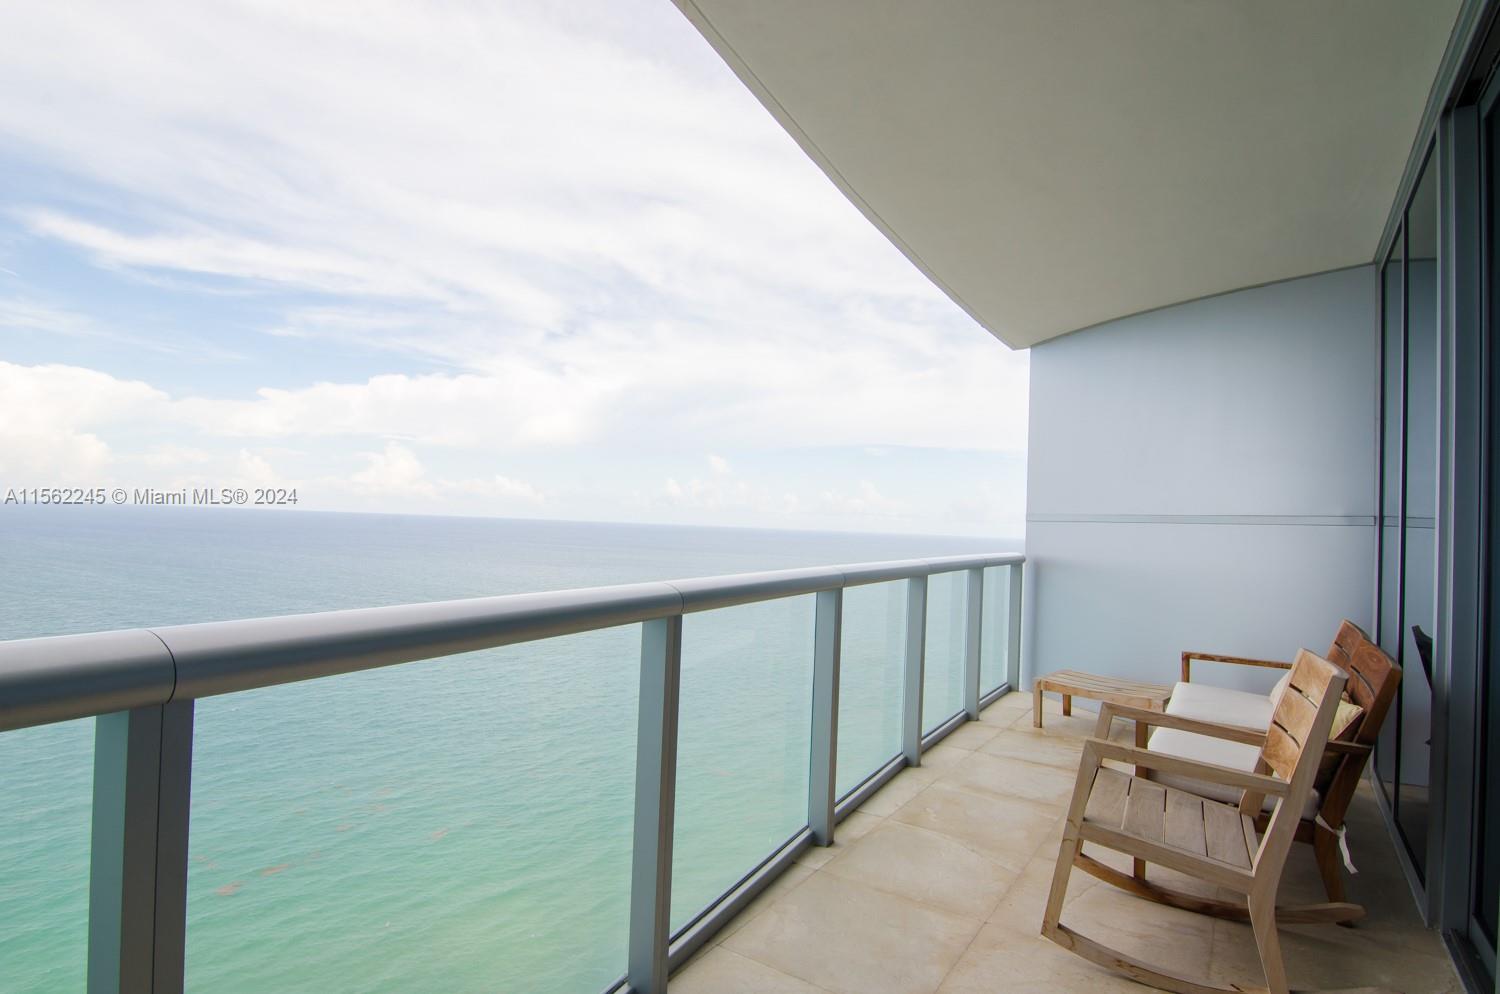 Enjoy living at the JADE BEACH. Fully Furnished Unit with a stunning Ocean and City views from every room. This 3 bed/3.5 bath residence offers private entrance, high-end appliances, great finishes, and unobstructed panoramic views to the ocean and intercostal/skyline, thanks to the flow-thru floorplans and floor to ceiling and to wall windows.